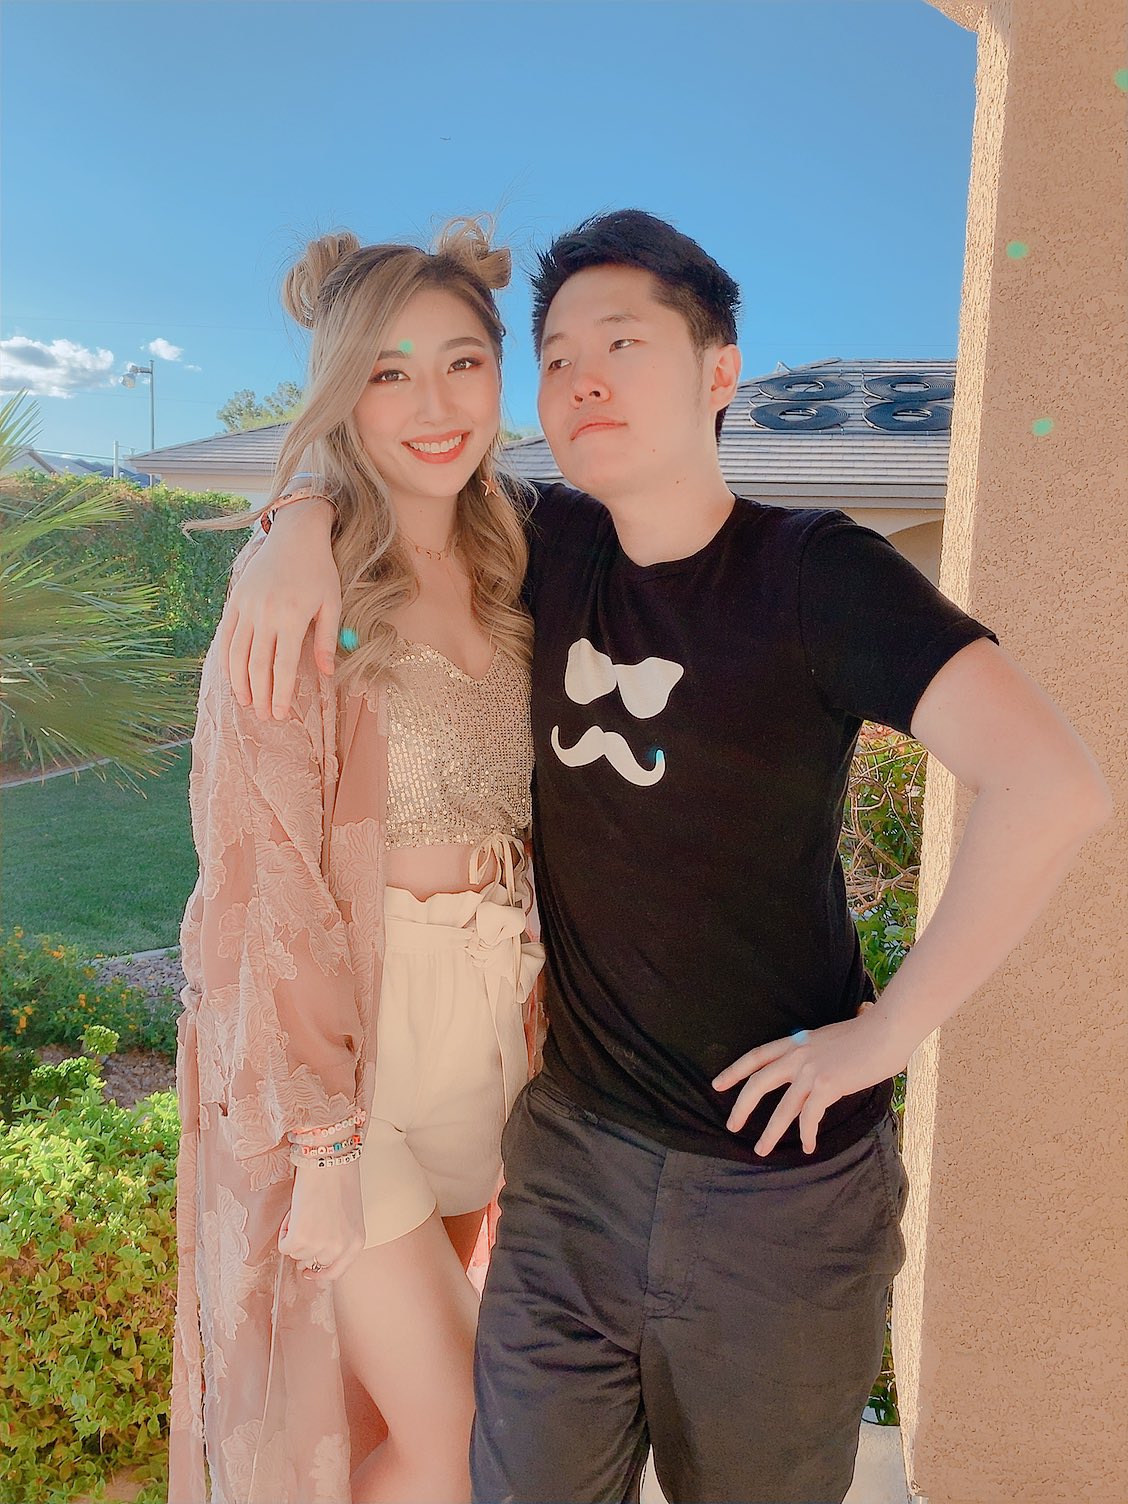 Are toast and janet dating reddit